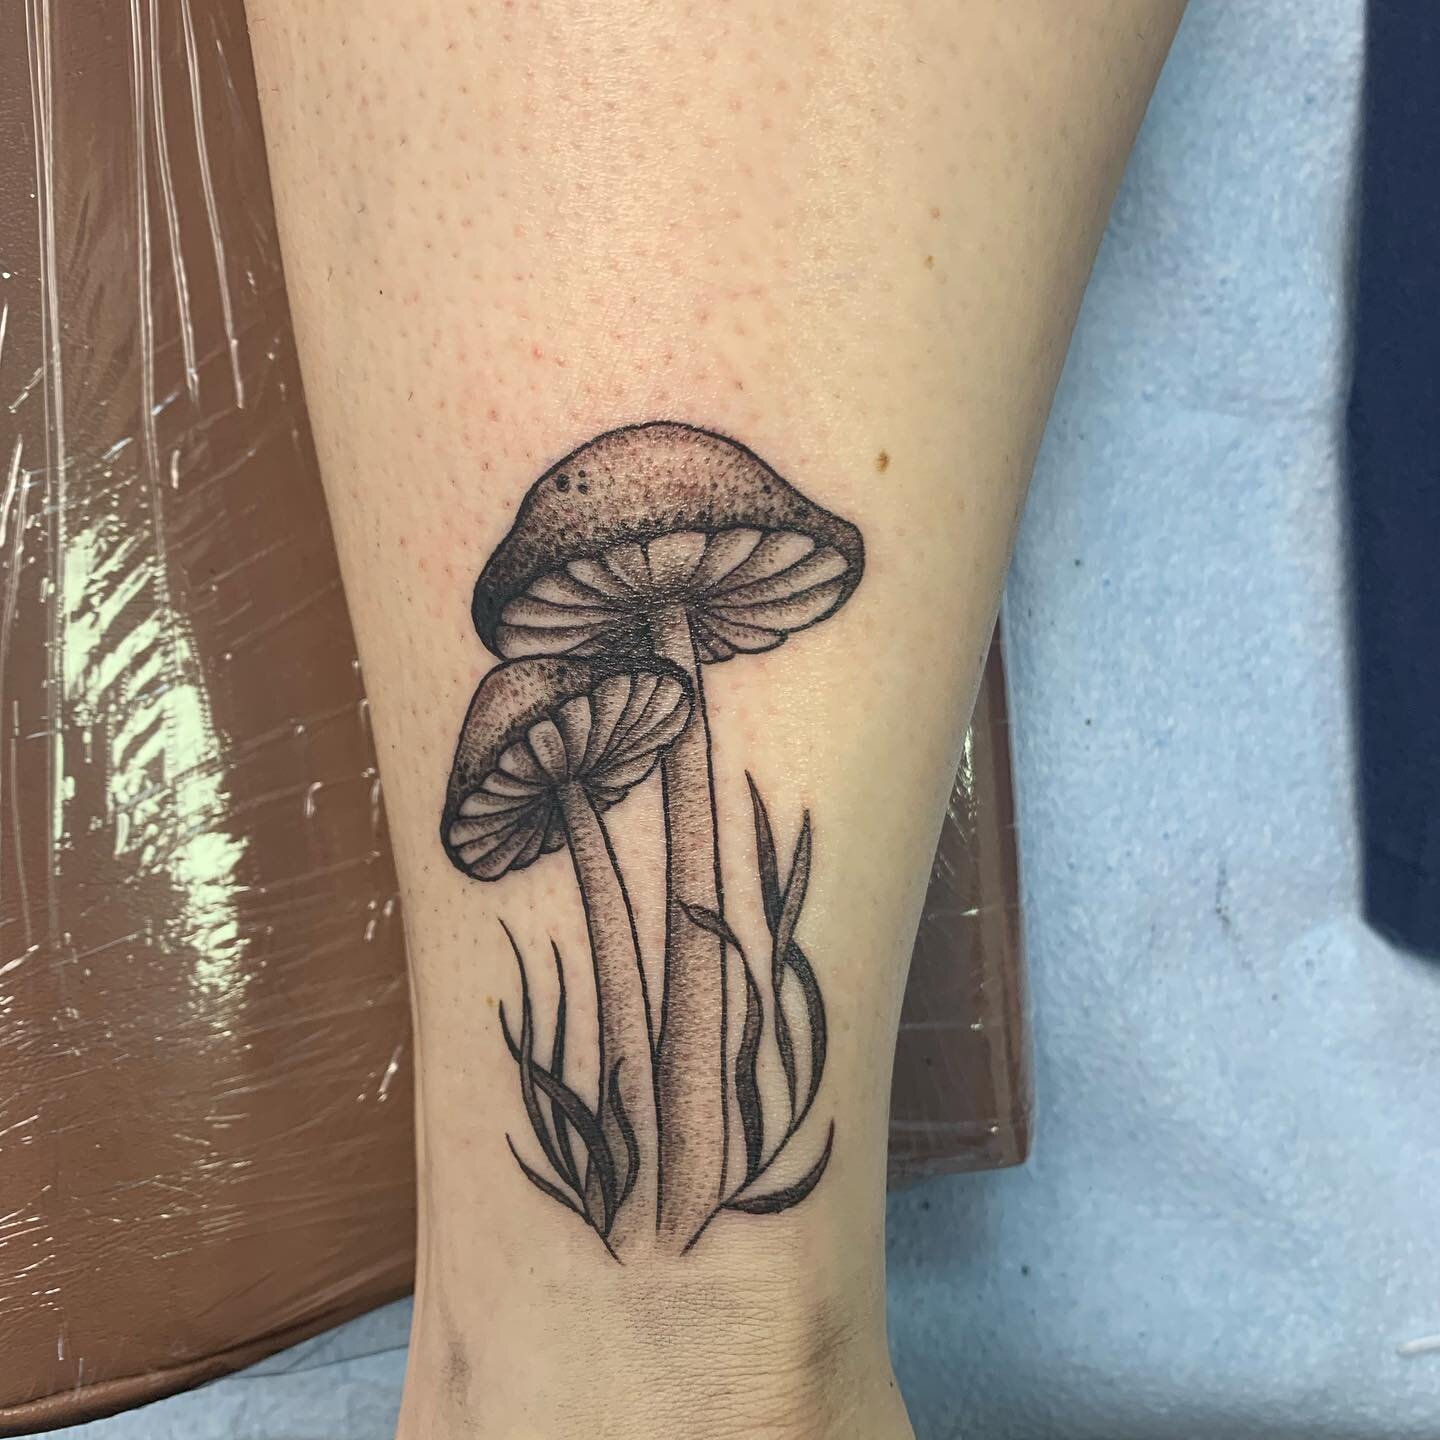 Two different mushroom tattoos by Emily 🍄🌸 @emilybee_art To book or inquire please email us at gypsykingstattoos@gmail.com
.
.
.
.
 #tattoos #southeastmichigan #southeastmi #mitattooartist #detroittattooartist #MItattoo #tattooshop #mushroomtattoo 